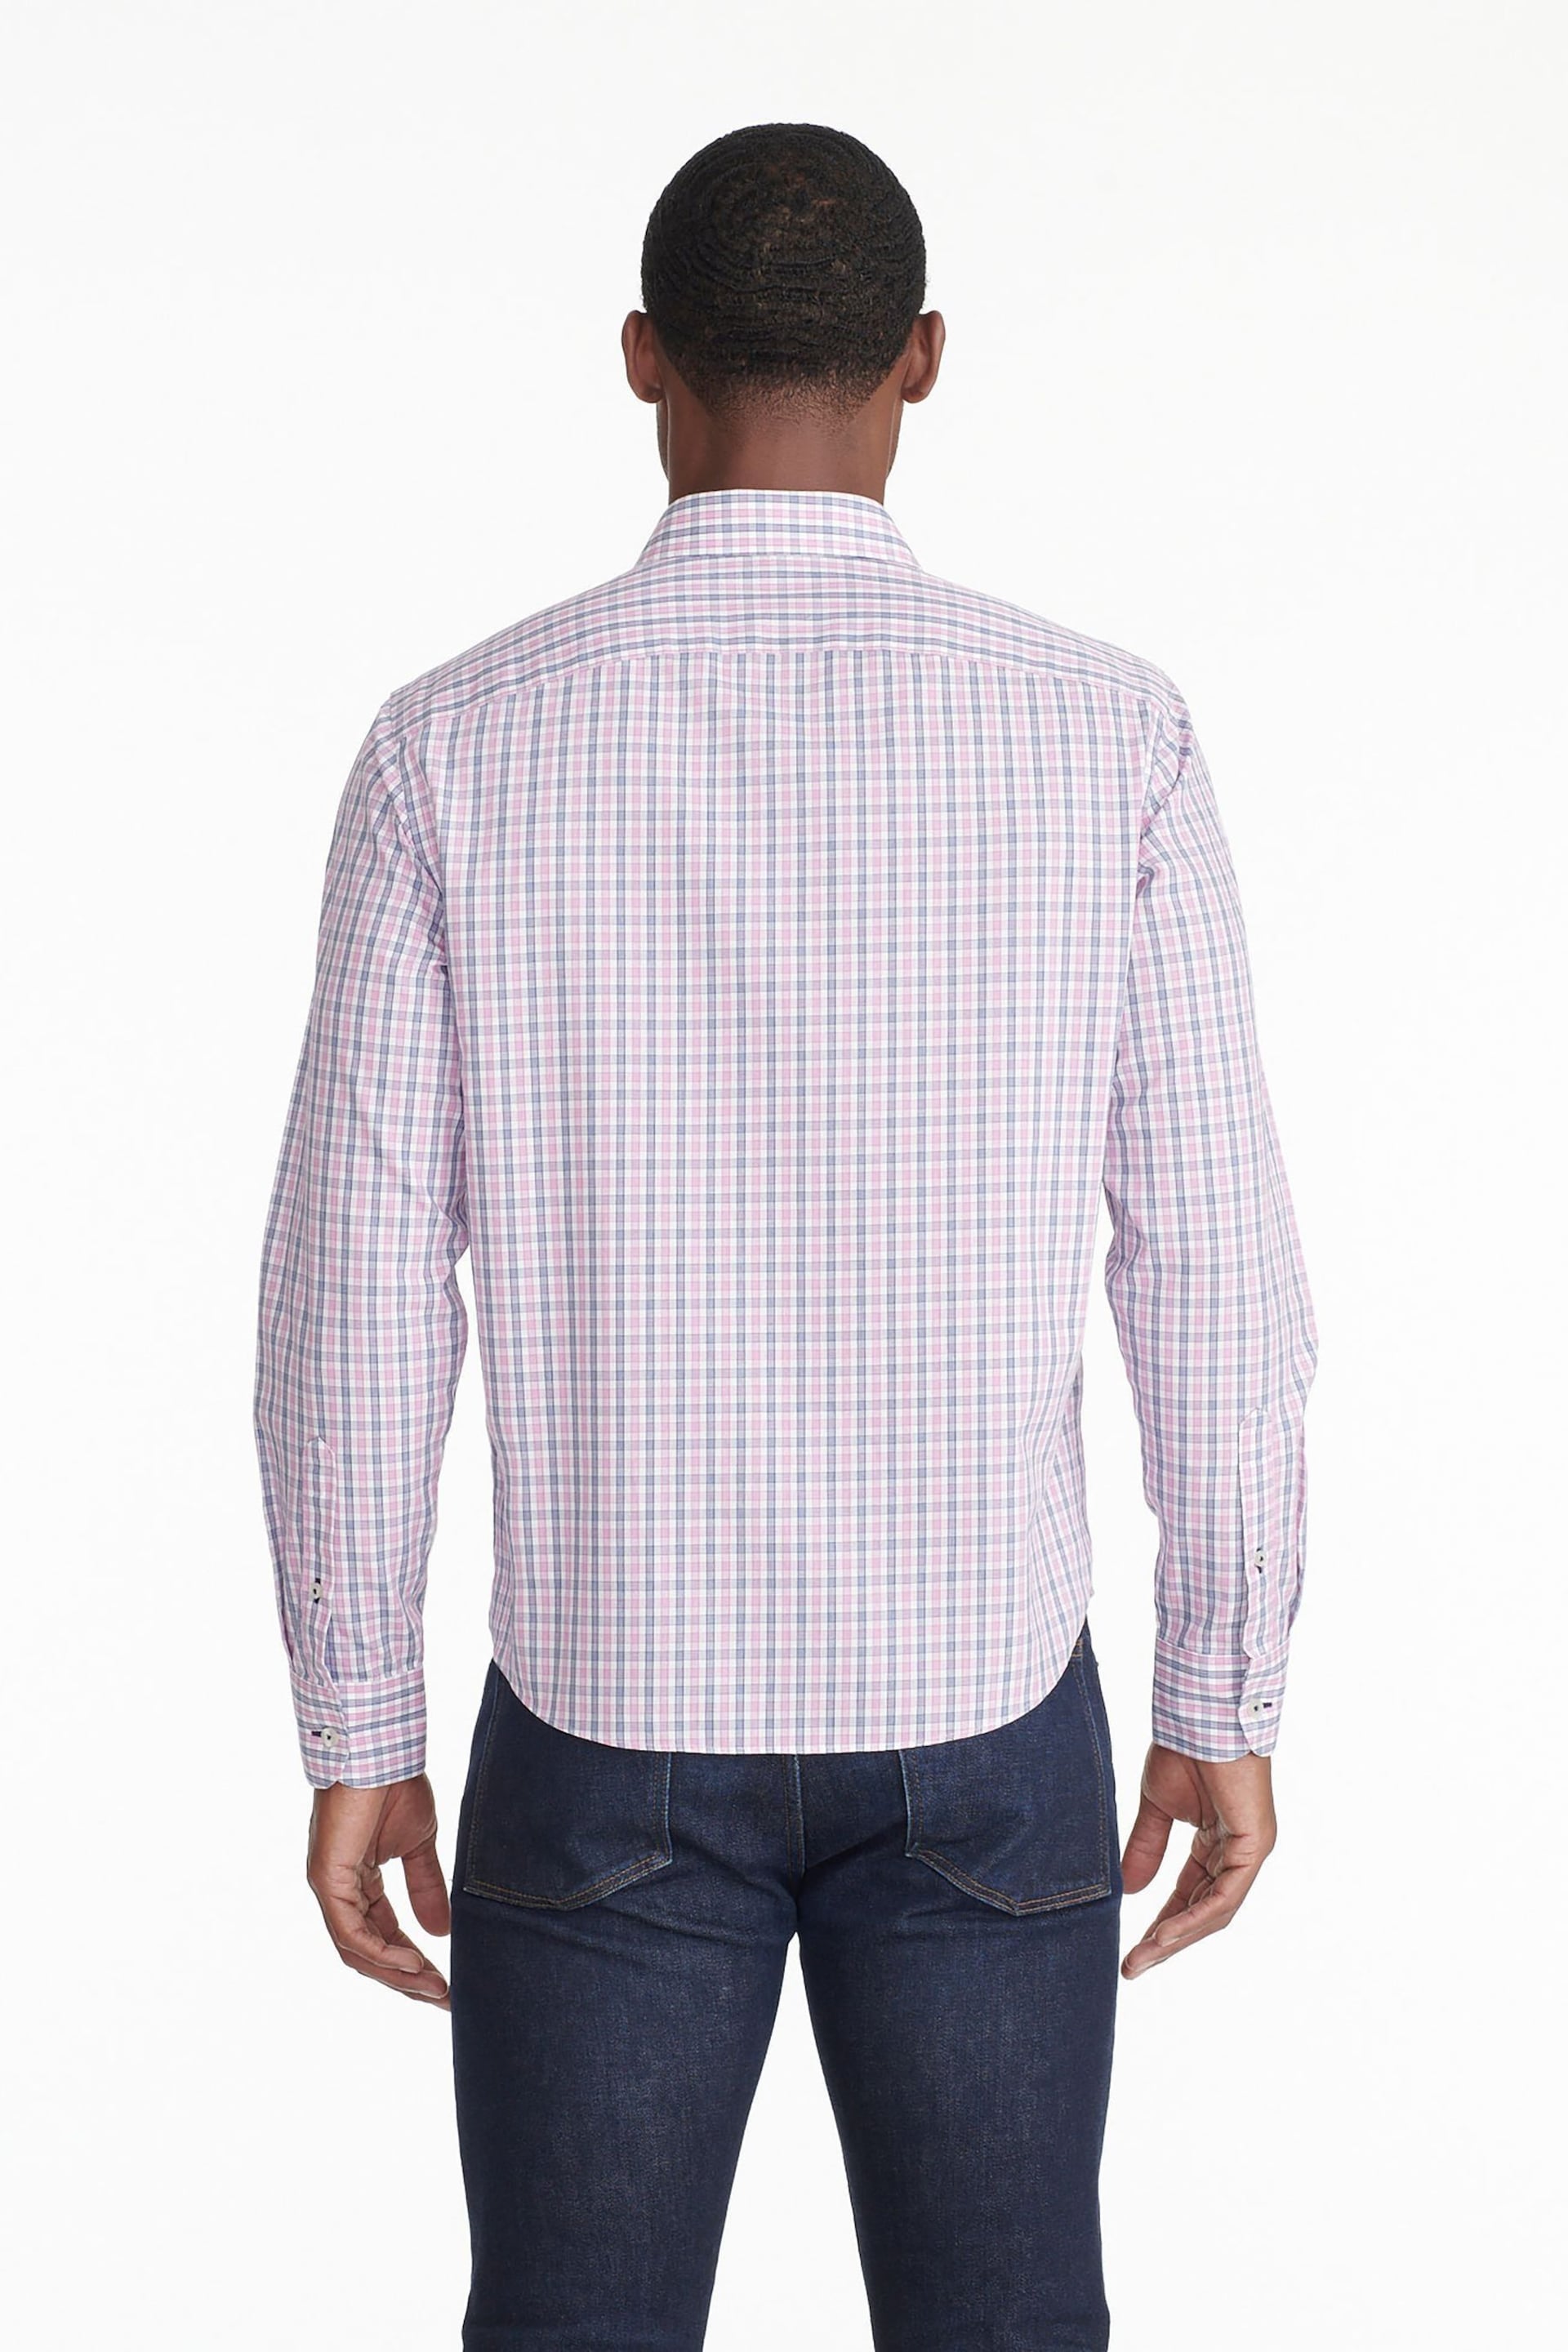 UNTUCKit Pink/Blue Wrinkle-Free Slim Fit Dolcetto Shirt - Image 2 of 6